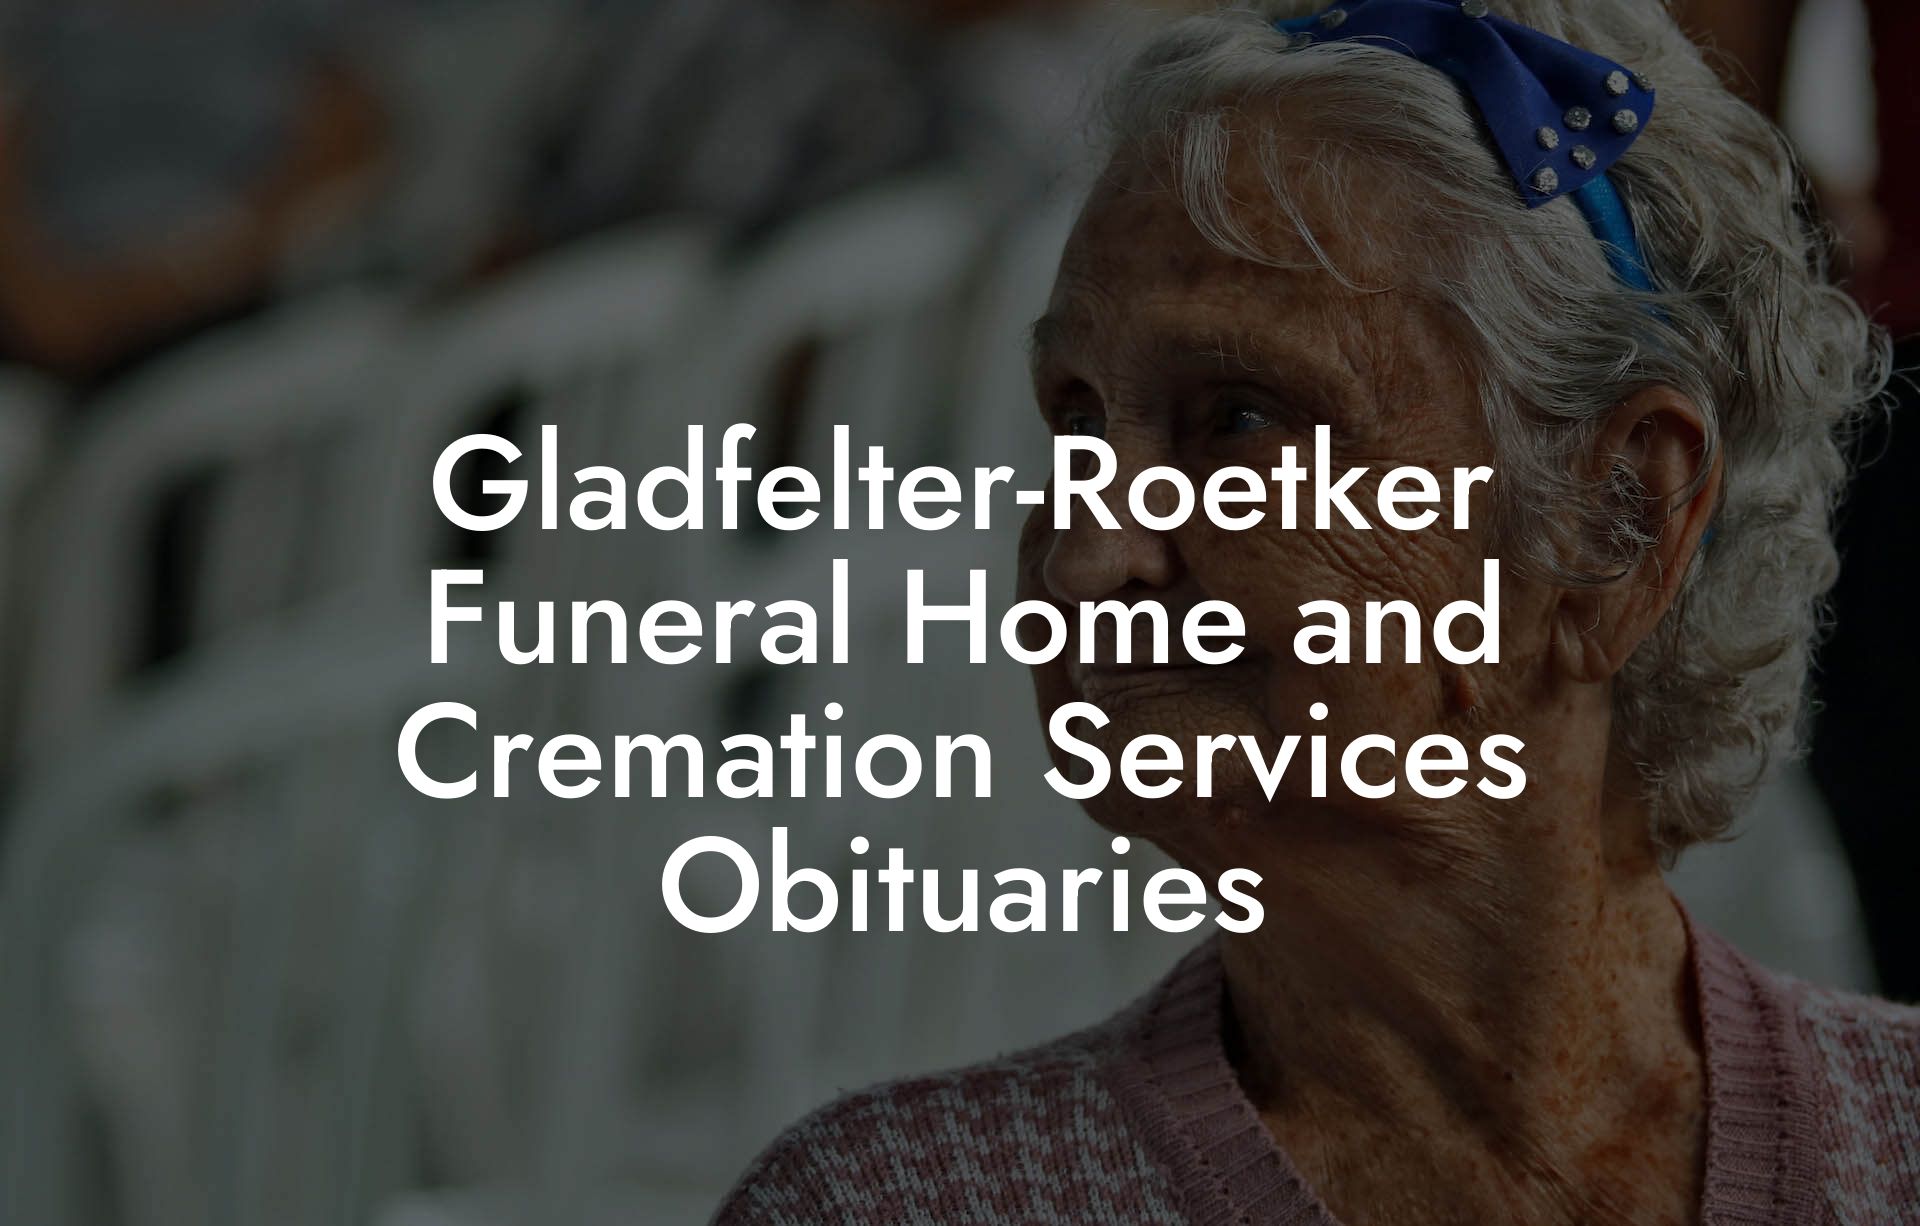 Gladfelter-Roetker Funeral Home and Cremation Services Obituaries